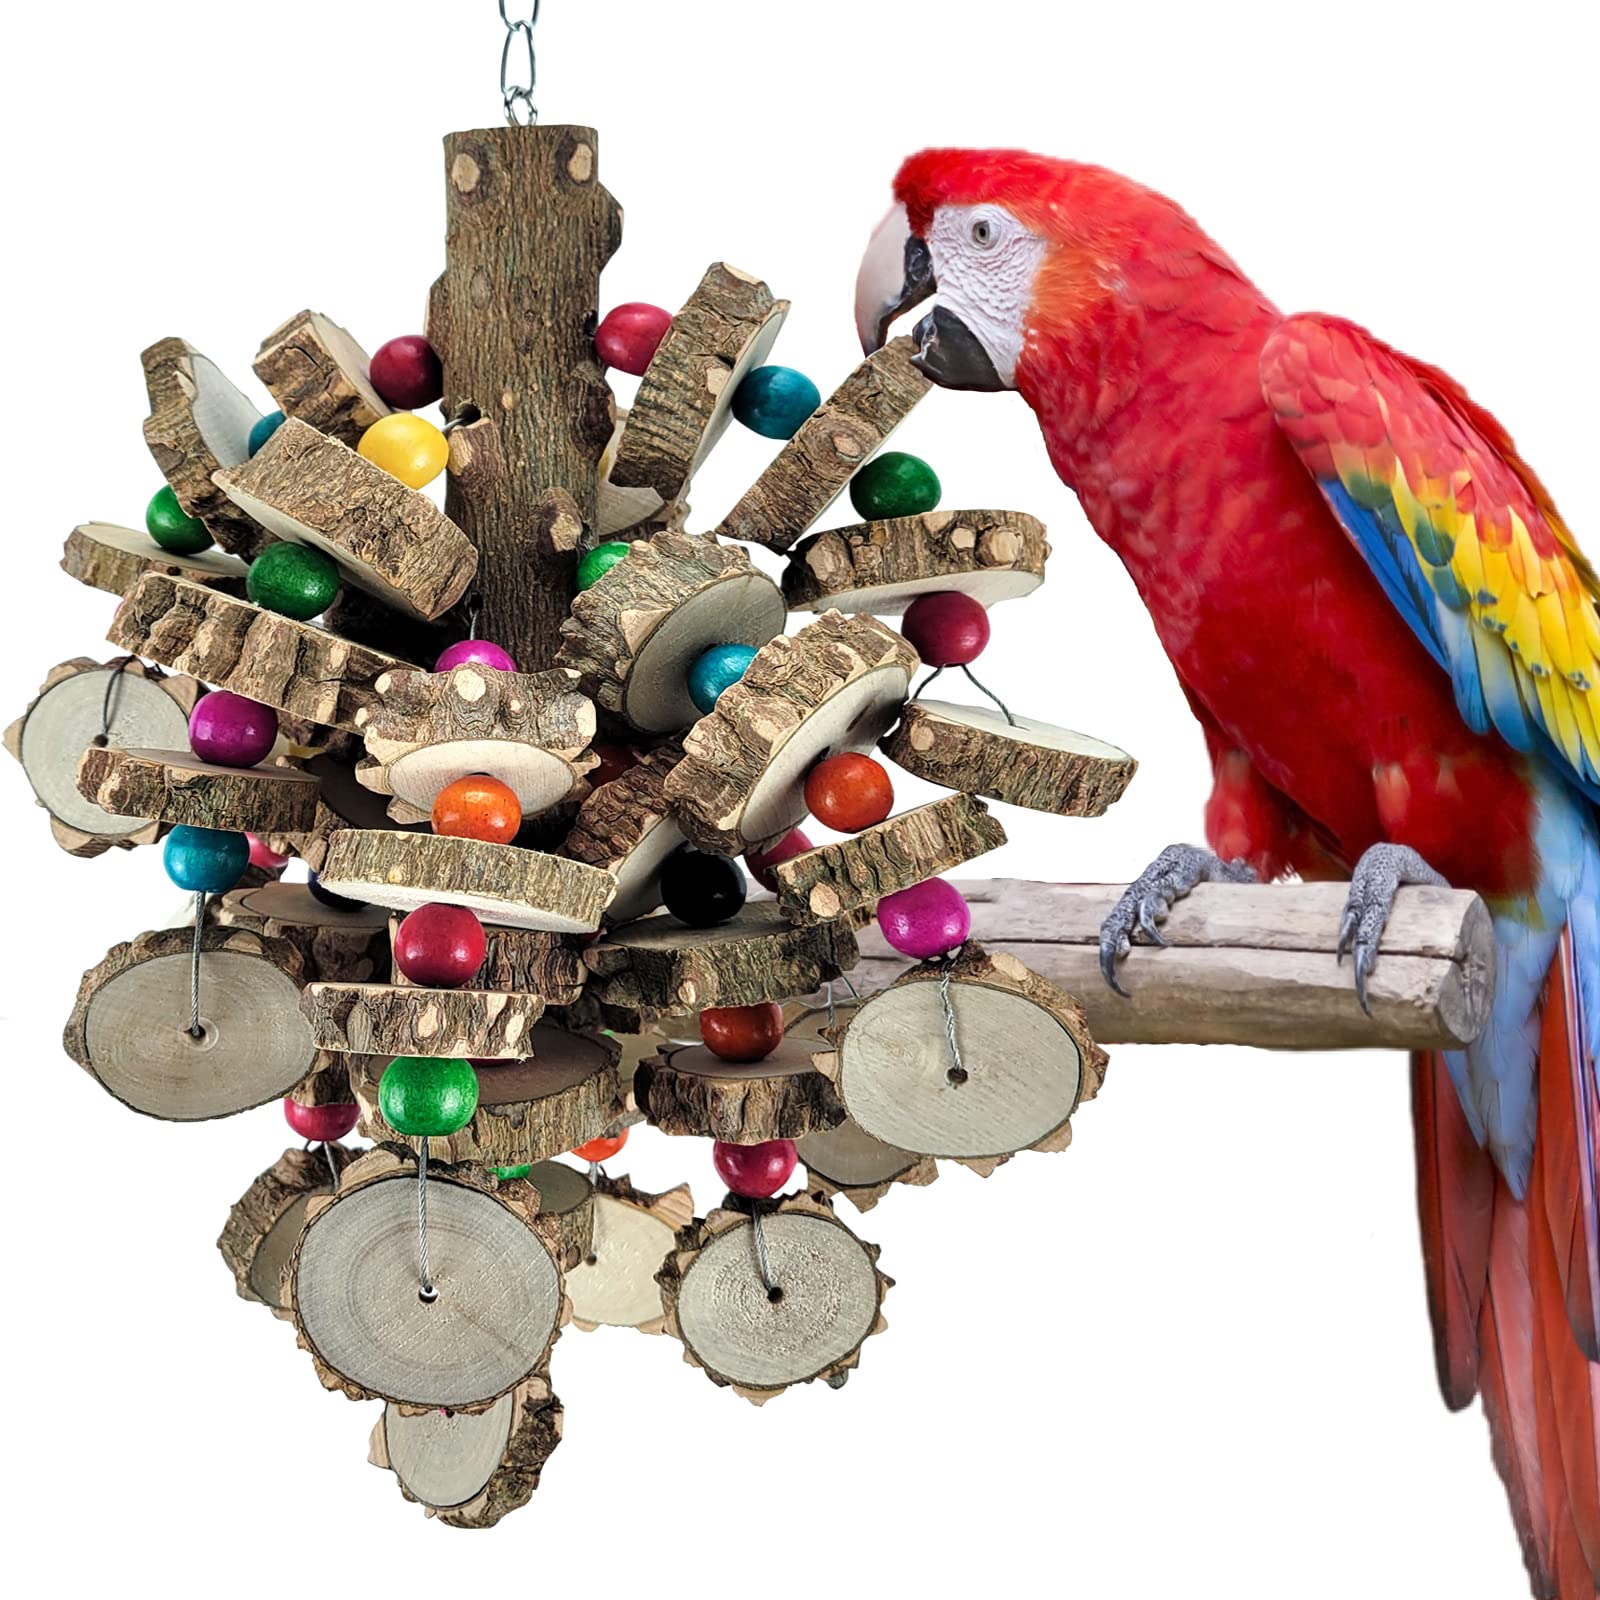 Toys, Parrot Toys for Large Birds, Peppered Wood African Grey Macaws, Cockatoos, Amazon Parrot Toys, Aviary Hanging Toys